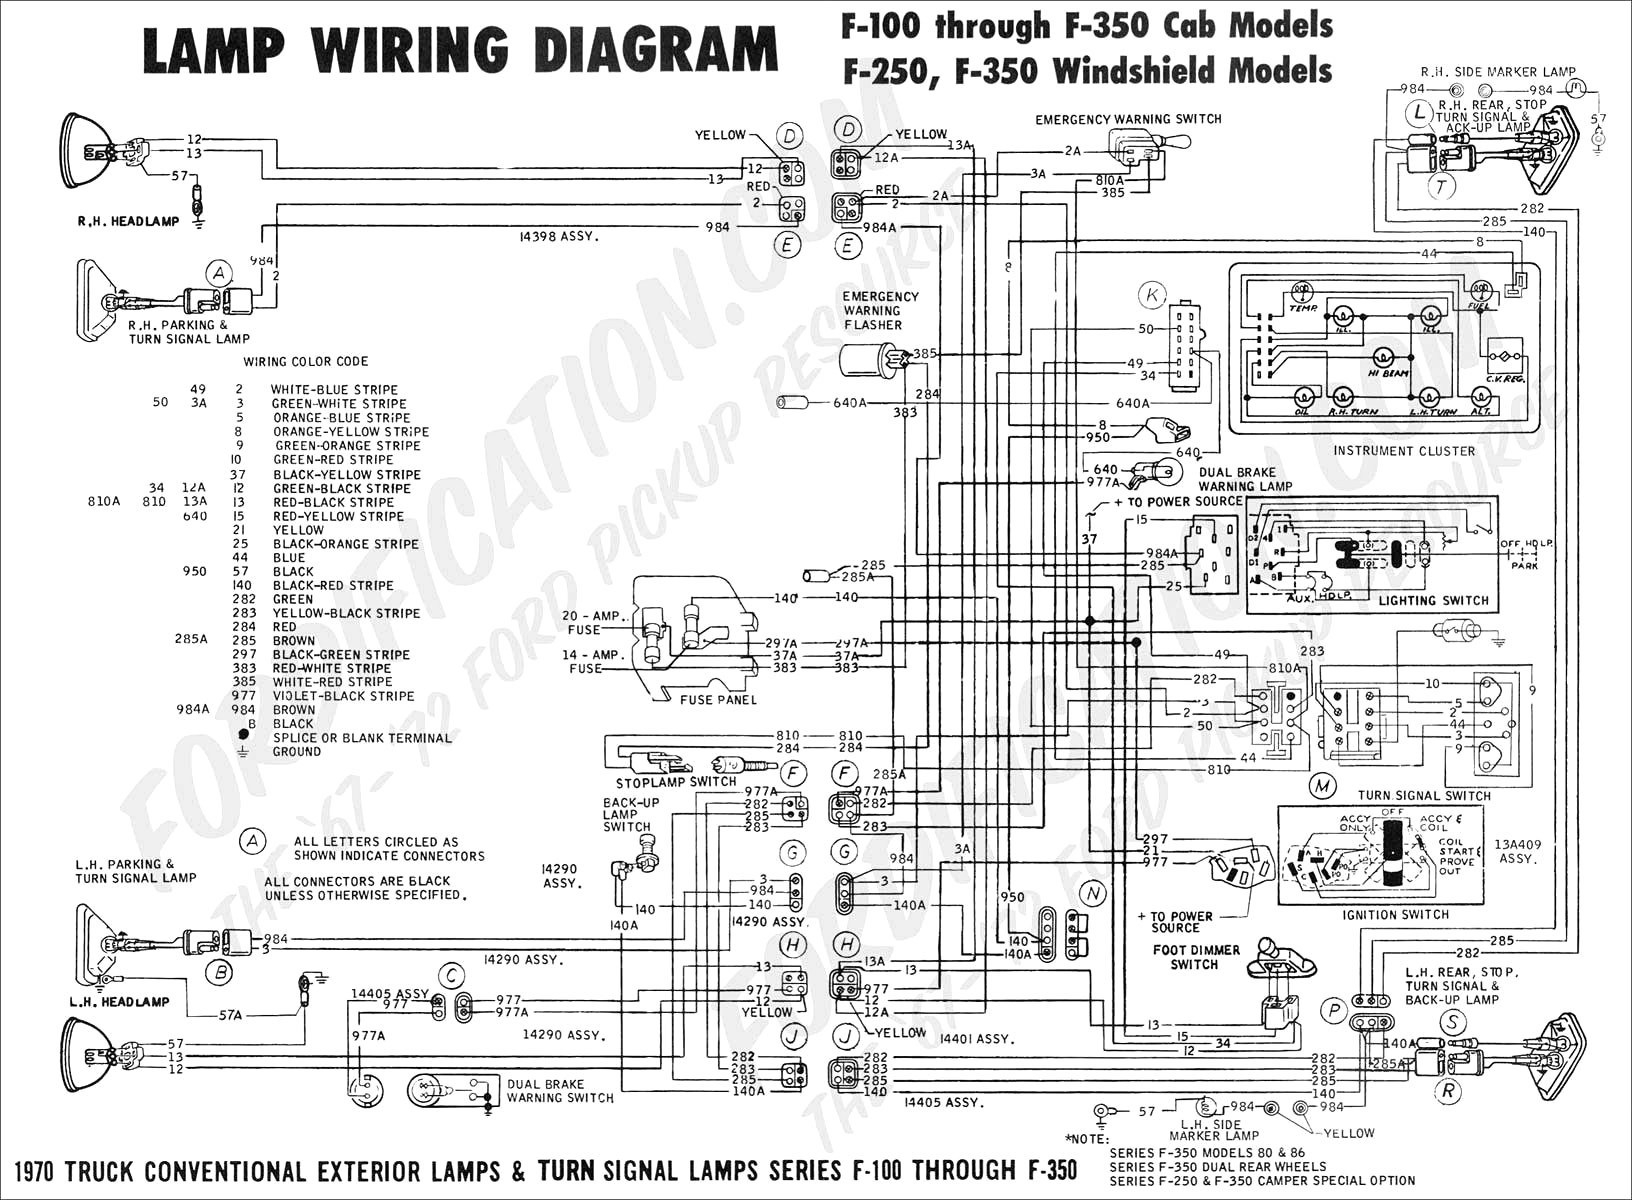 Phone Line Wiring Diagram Wiring Diagram Furthermore Boat Wiring Harness Diagram Besides Sea